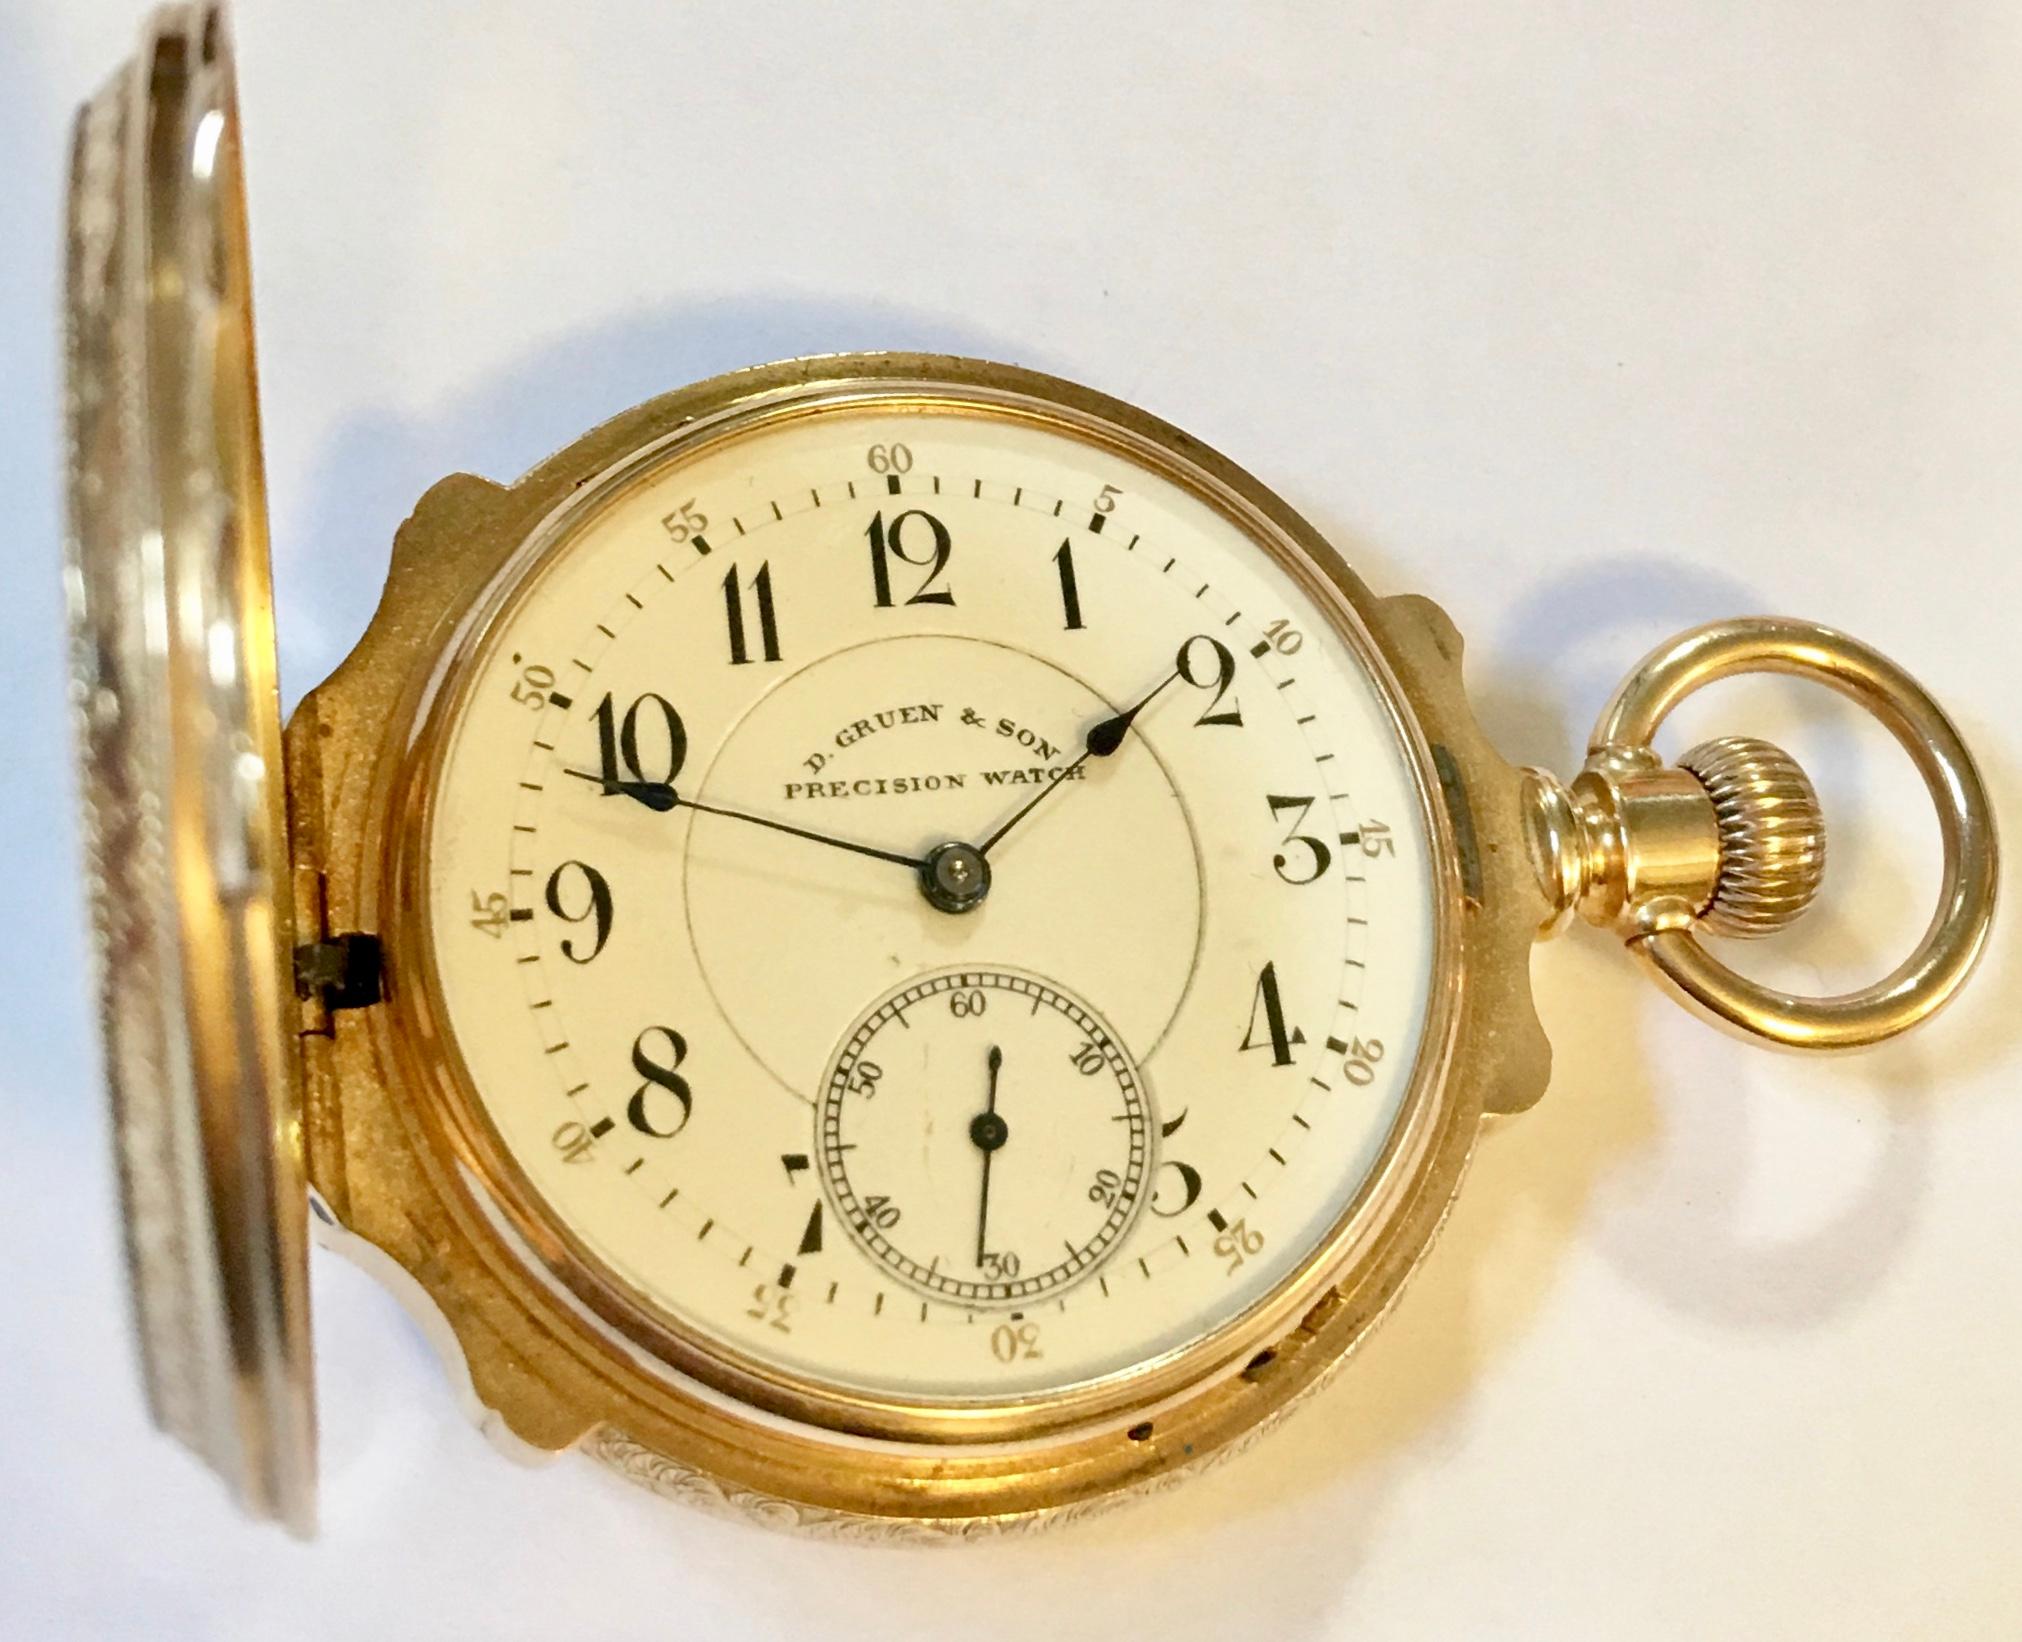 A 14-karat 53mm diameter gold solid full hunter pocket watch. The watch has a white enamel dial signed D.Gruen & Son with Arabic numerals and a subsidiary second hand dial. Also, has a smooth stem wind, a hinged back cover to protect its works and